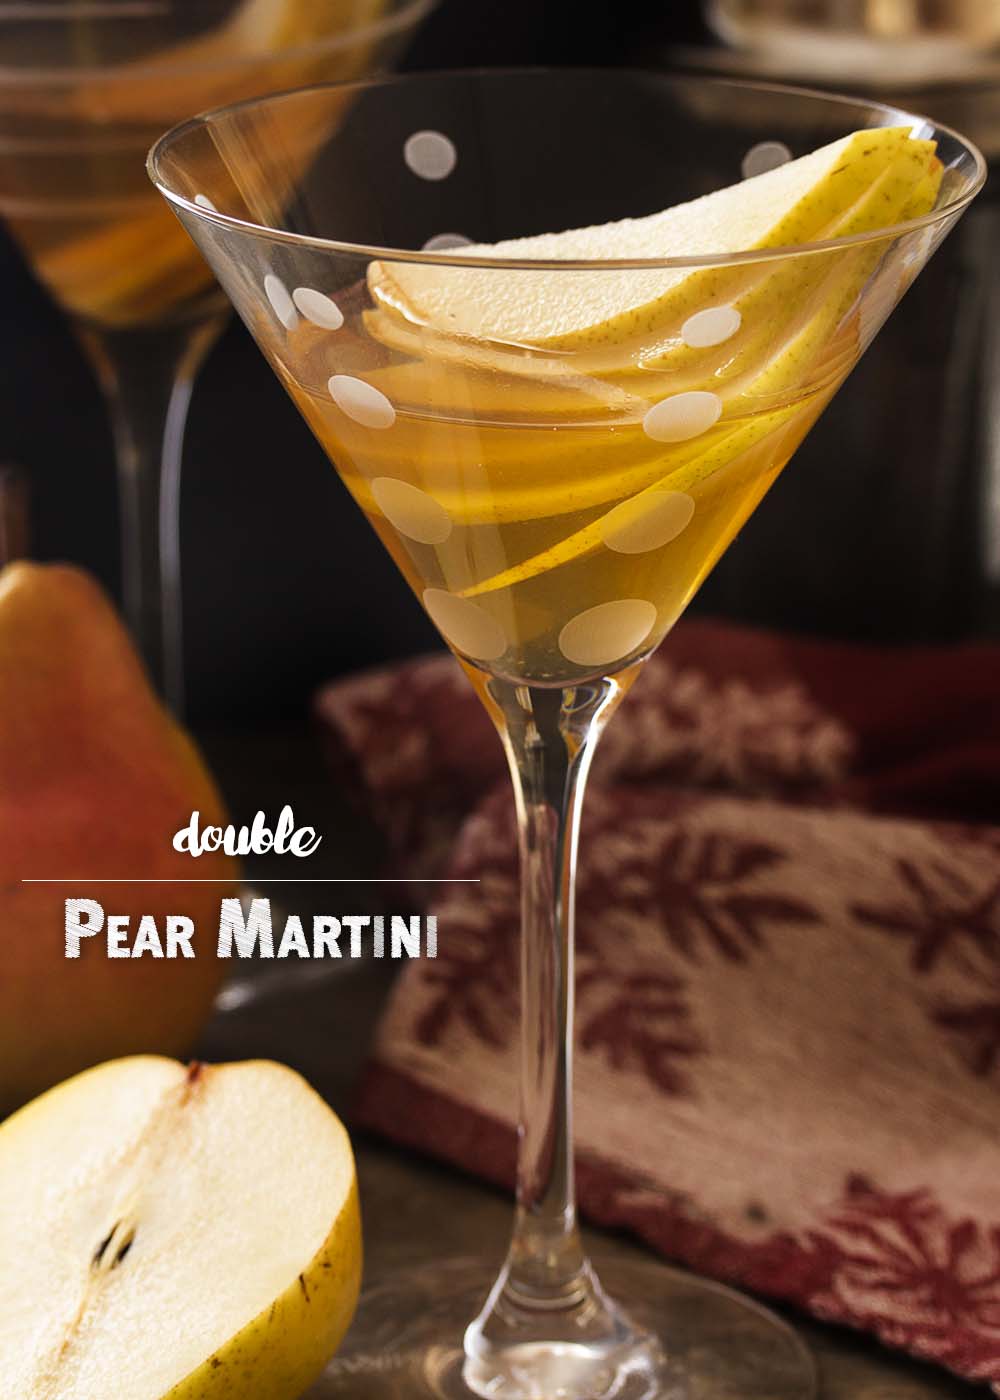 Have some ripe pears sitting on your counter? Make some spiced pear syrup and shake it with pear brandy and vodka for a double pear martini! | justalittlebitofbacon.com